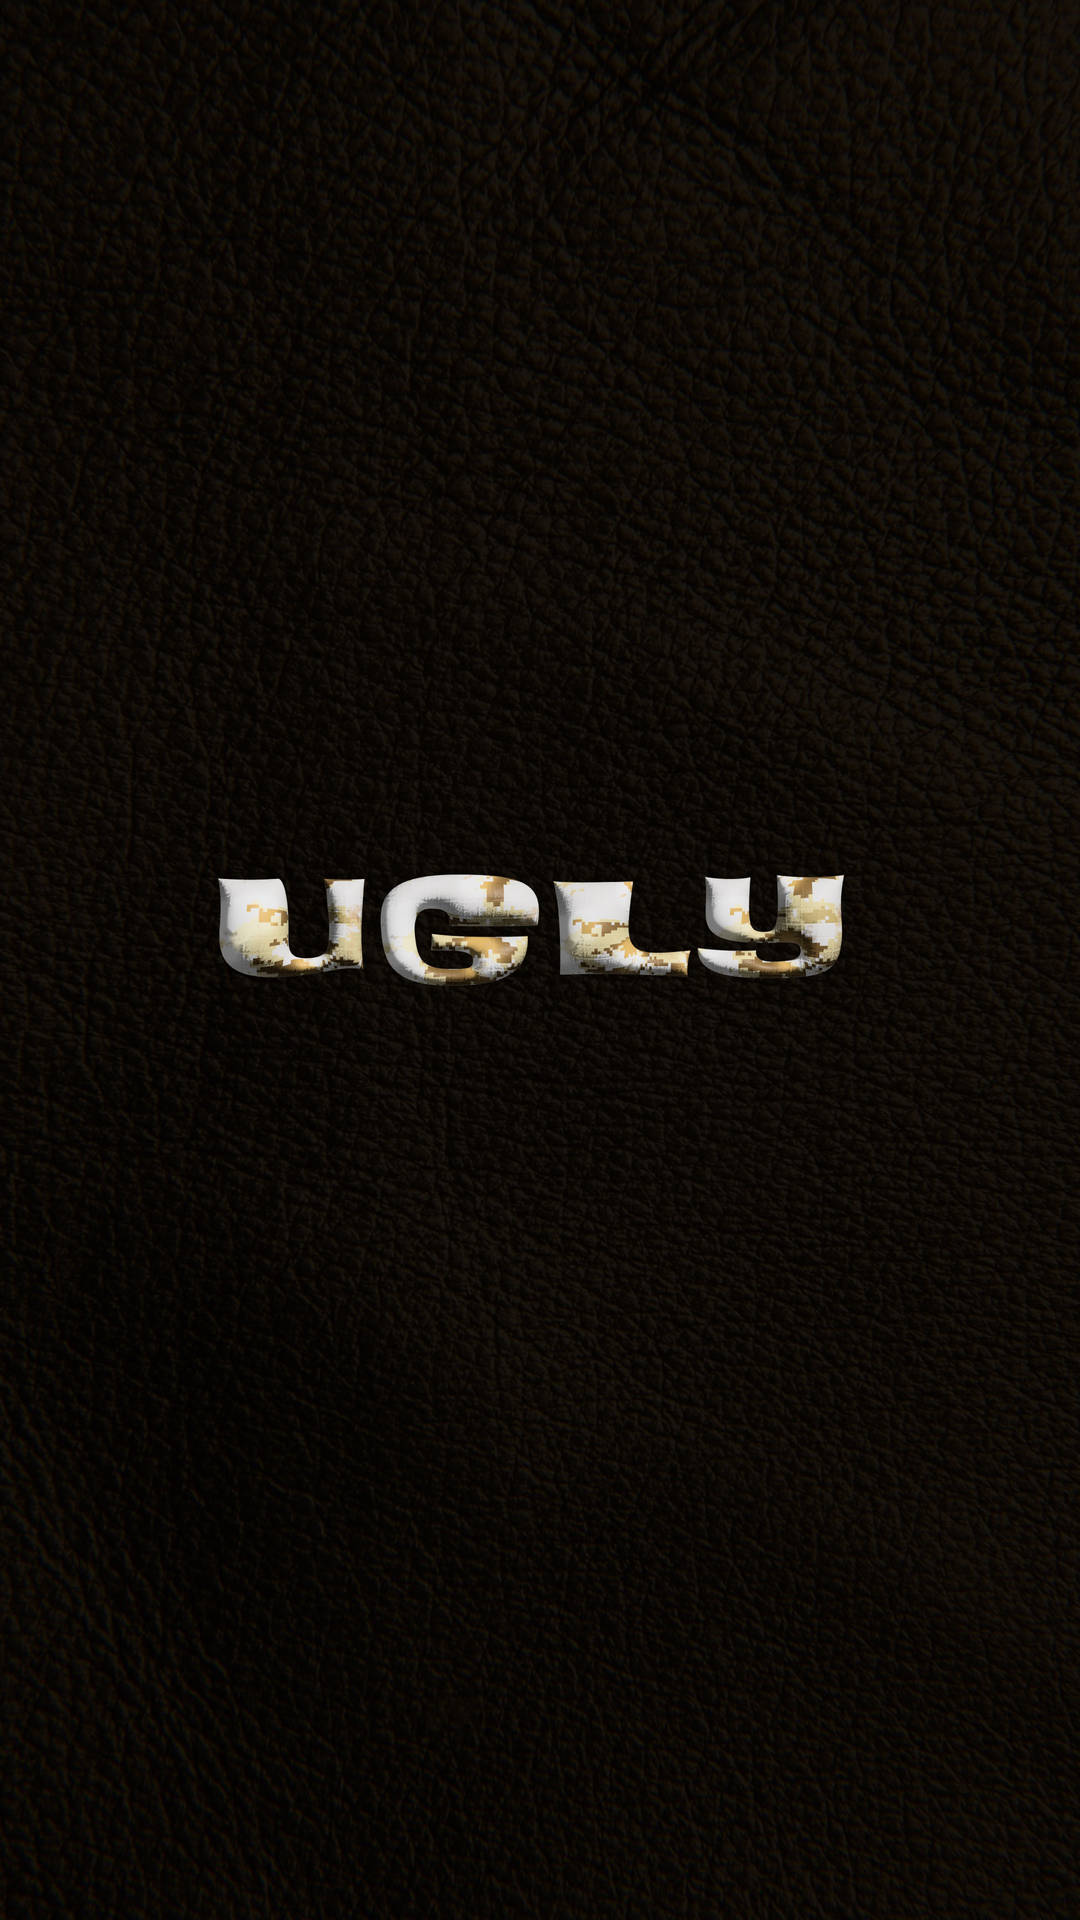 Ugly Leather-textured Background Background